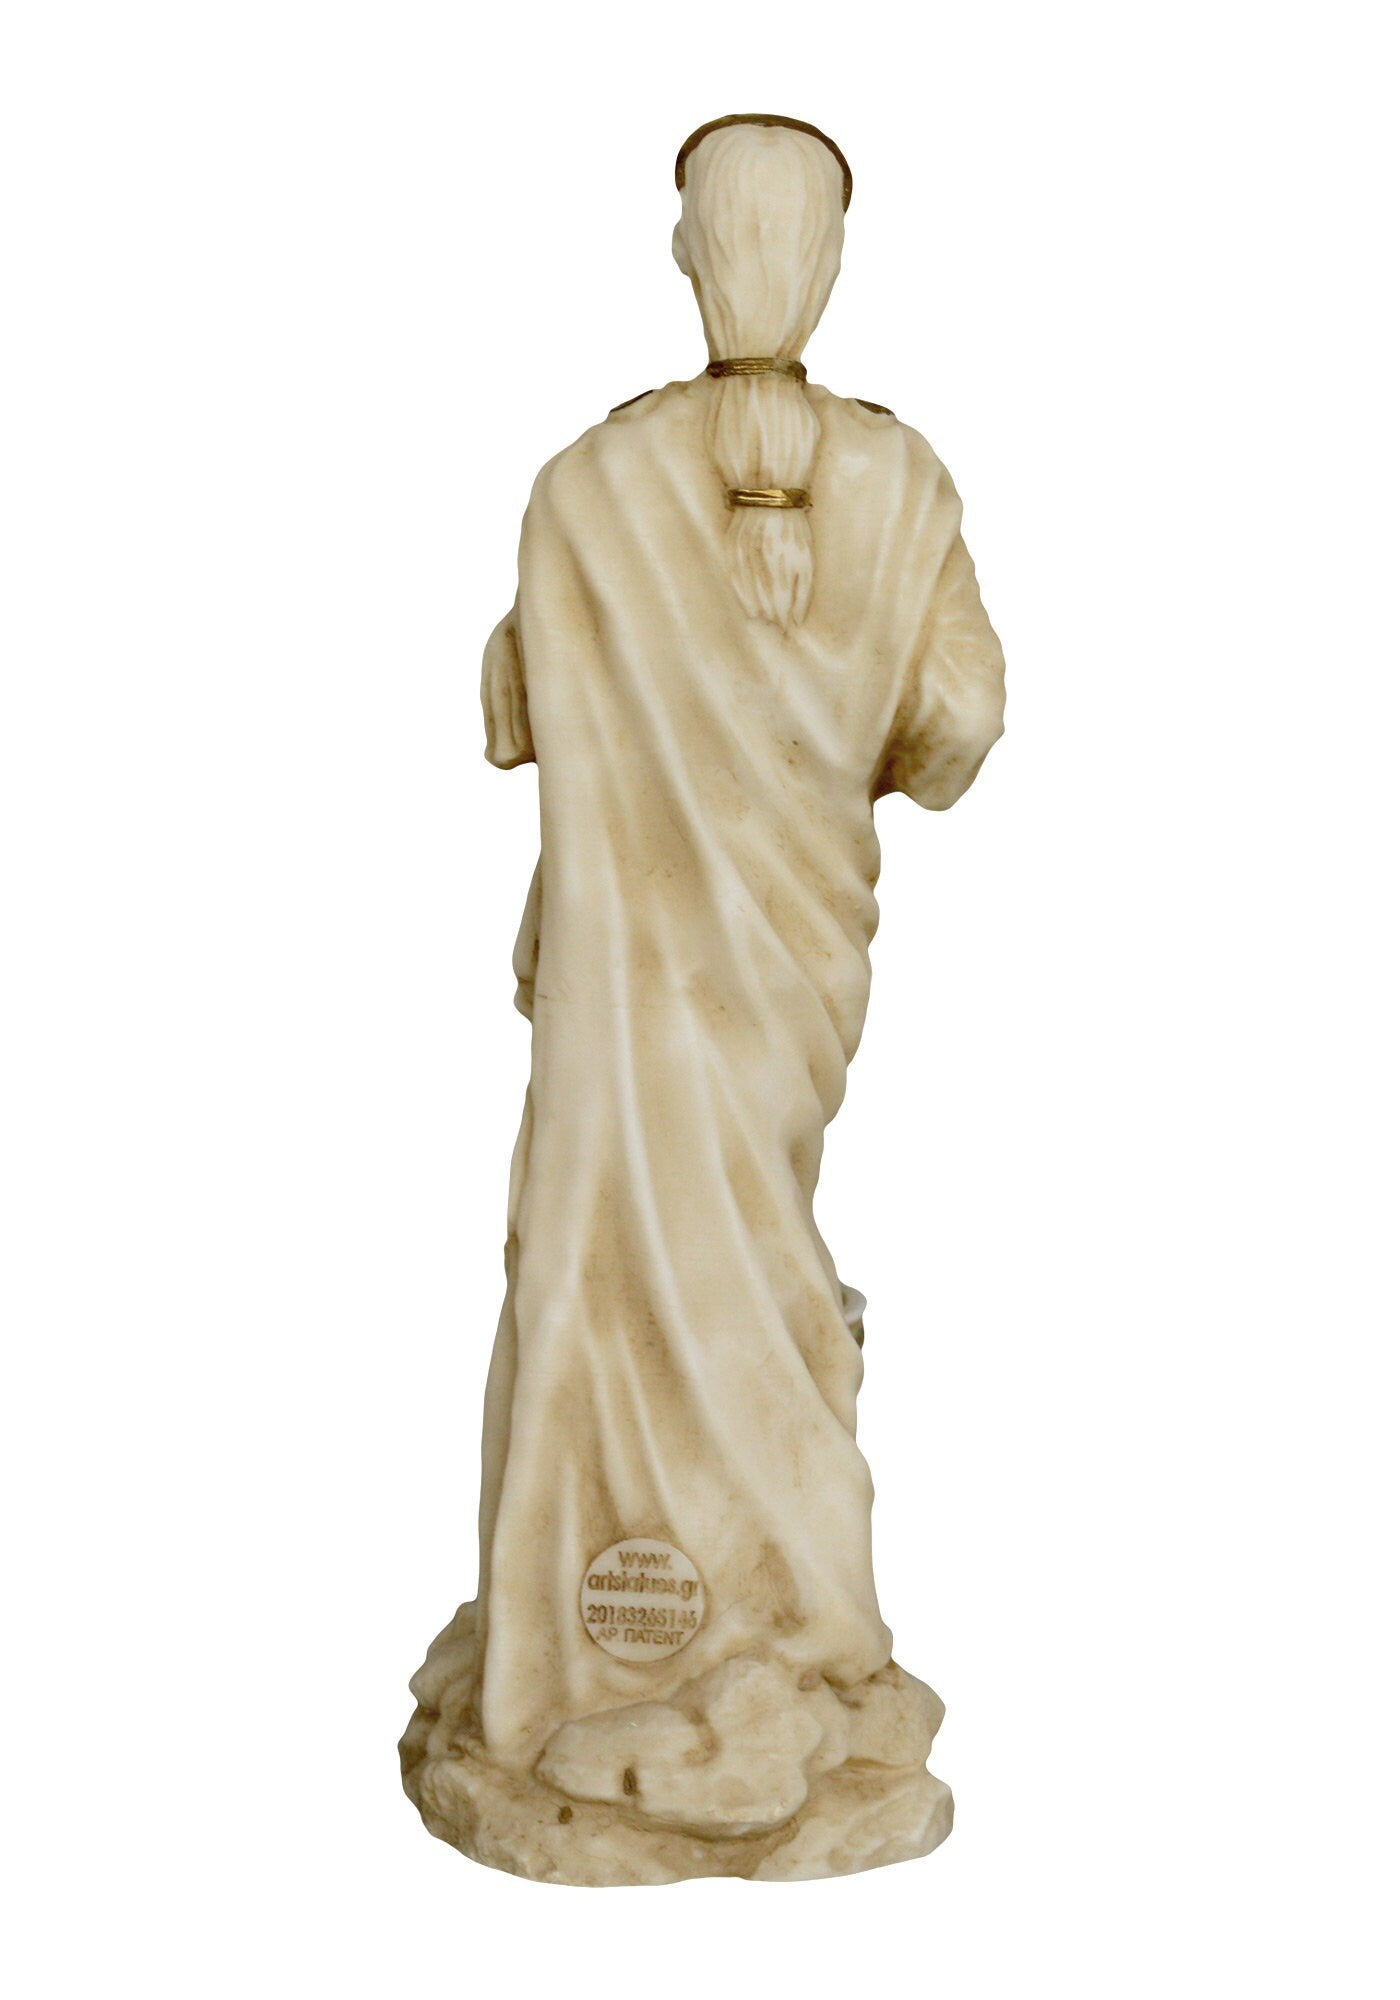 Hestia Vesta - Greek Roman Goddess of Hearth, Right Ordering of Domesticity, Family, Home and the State - Aged Alabaster Statue